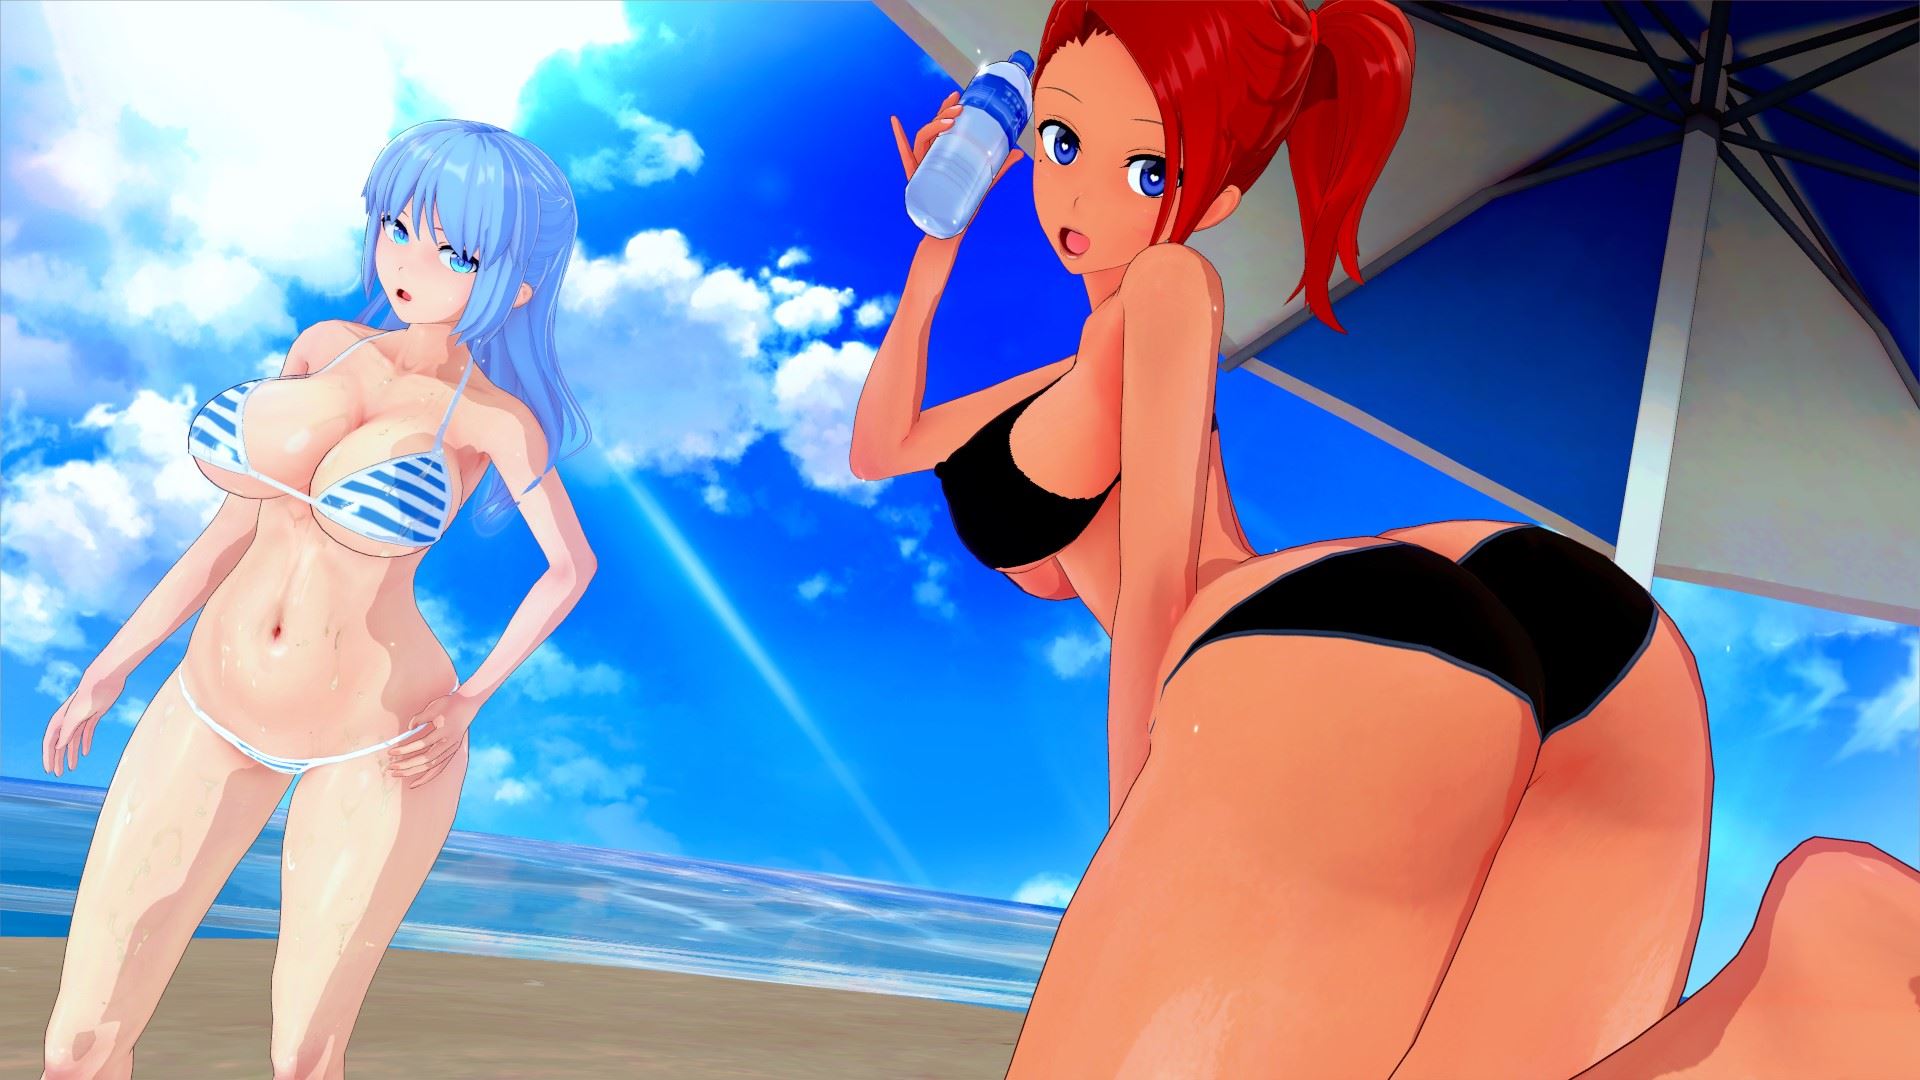 Beach Cartoon Sex Game - Summer Hotel Harem Ren'Py Porn Sex Game v.0.0.3 Chapter 3 Download for  Windows, MacOS, Linux, Android